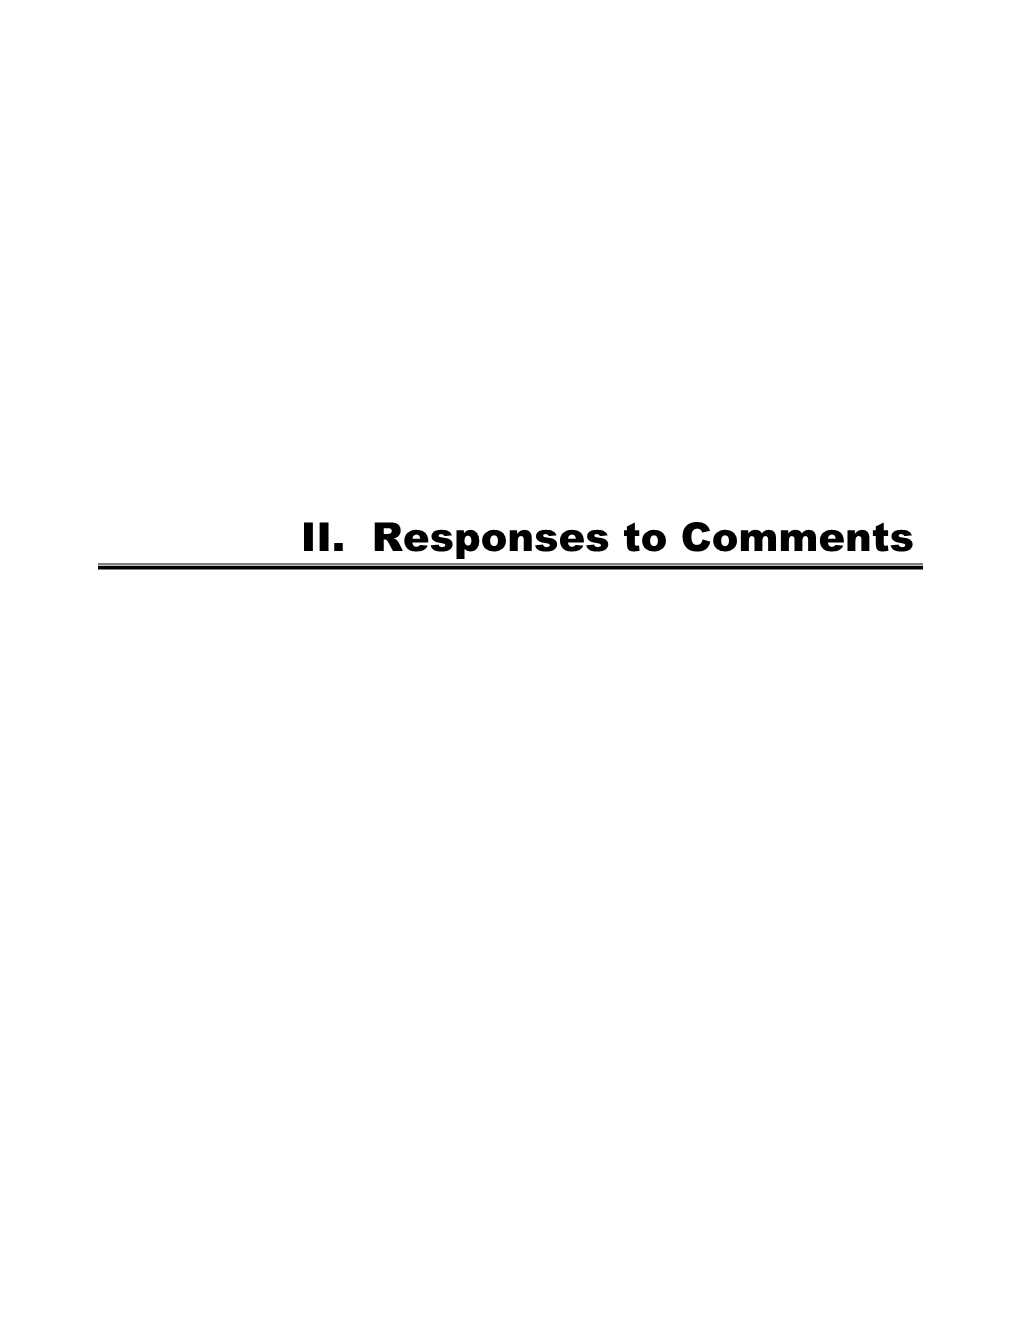 II. Responses to Comments